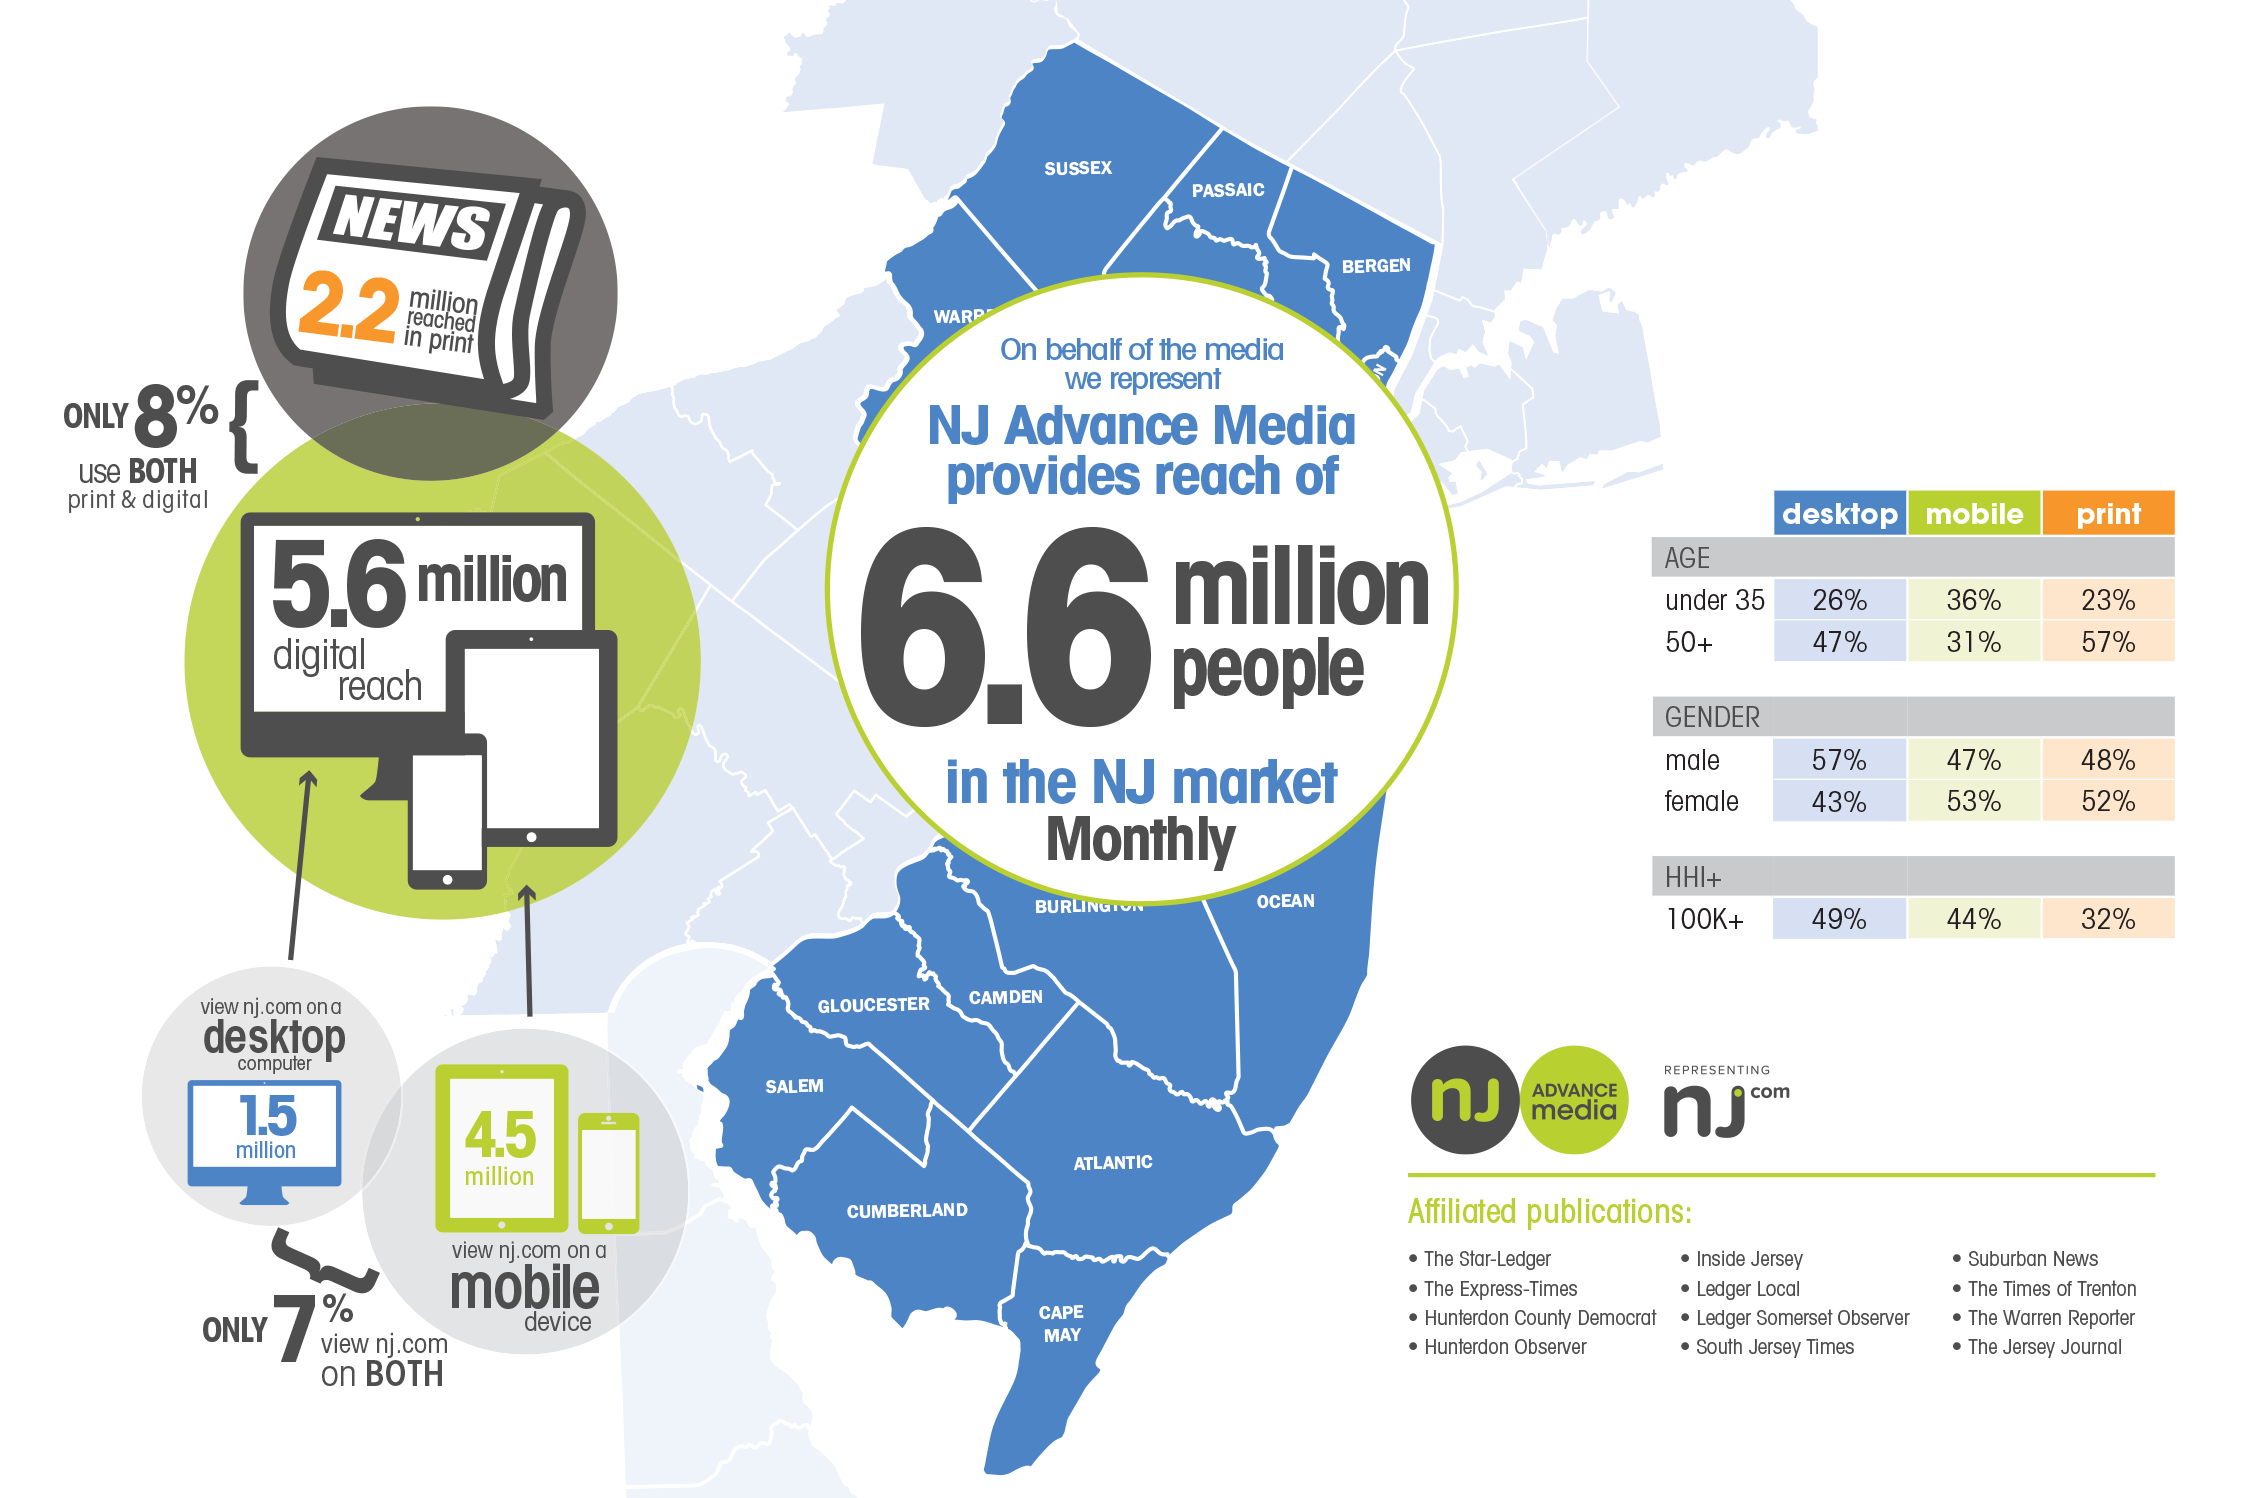 new jersey market research